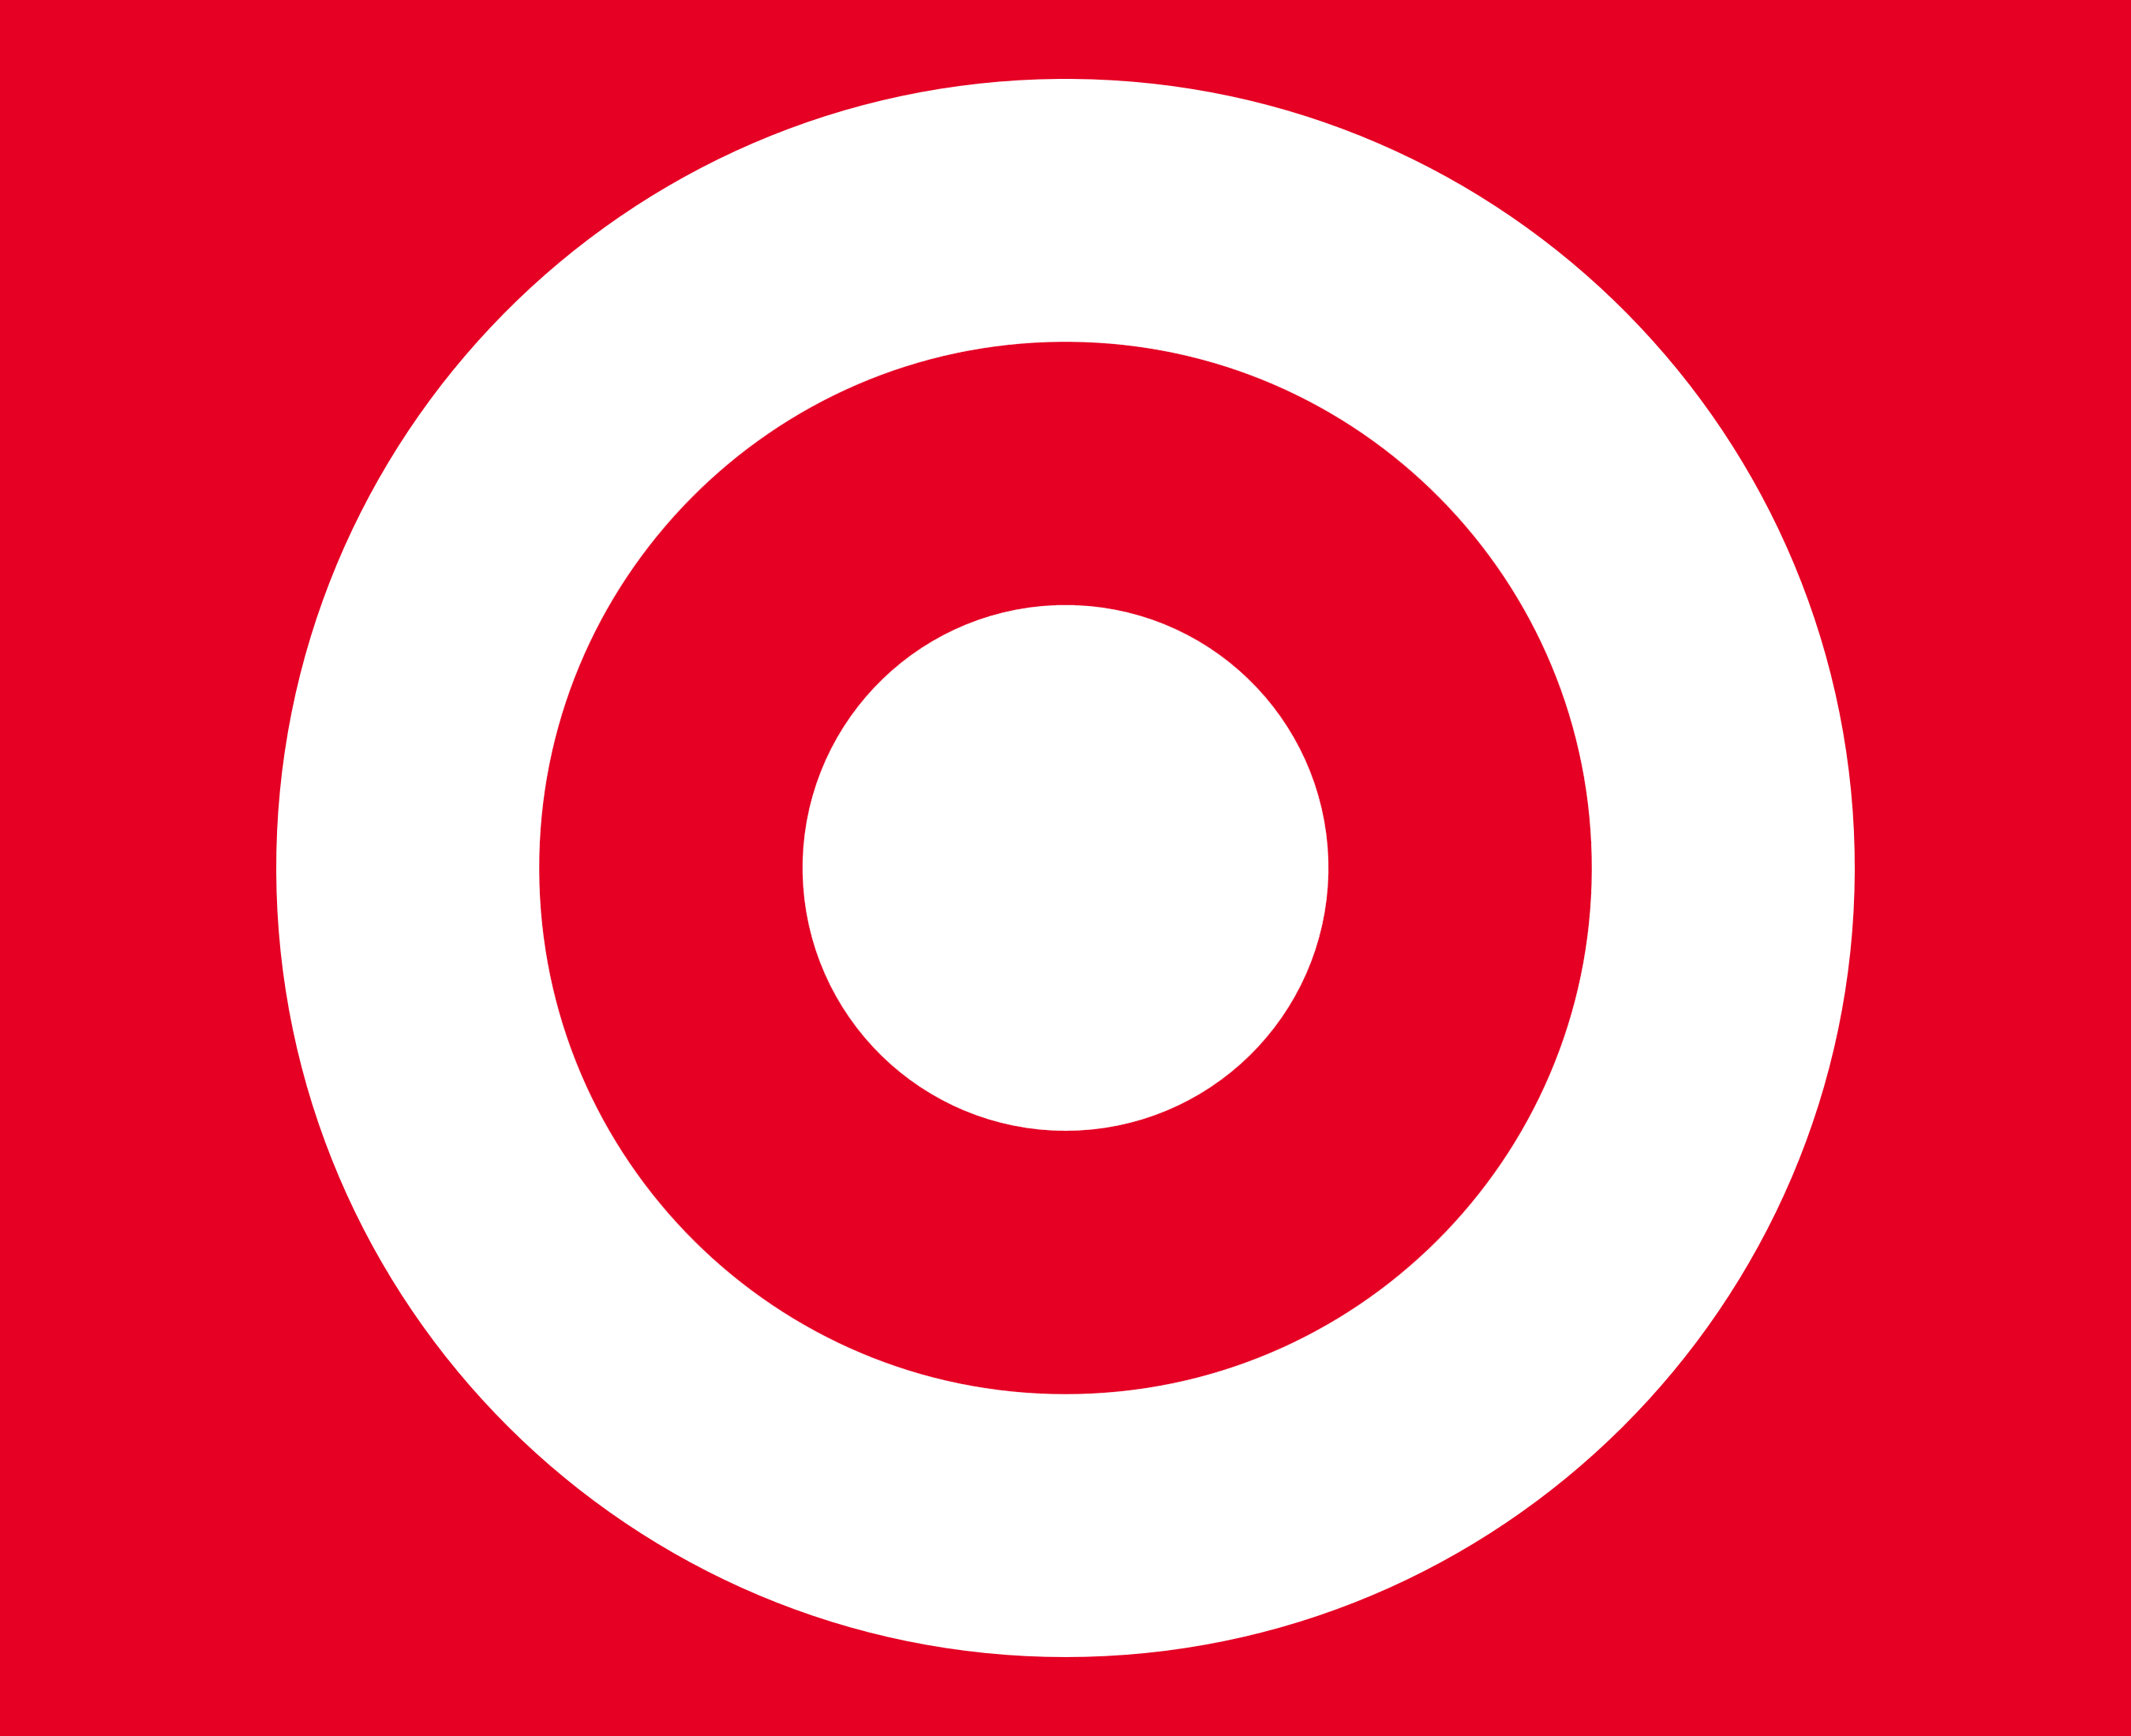 Me Ra Koh and Target Team Up with Sony to Empower Moms with Cameras